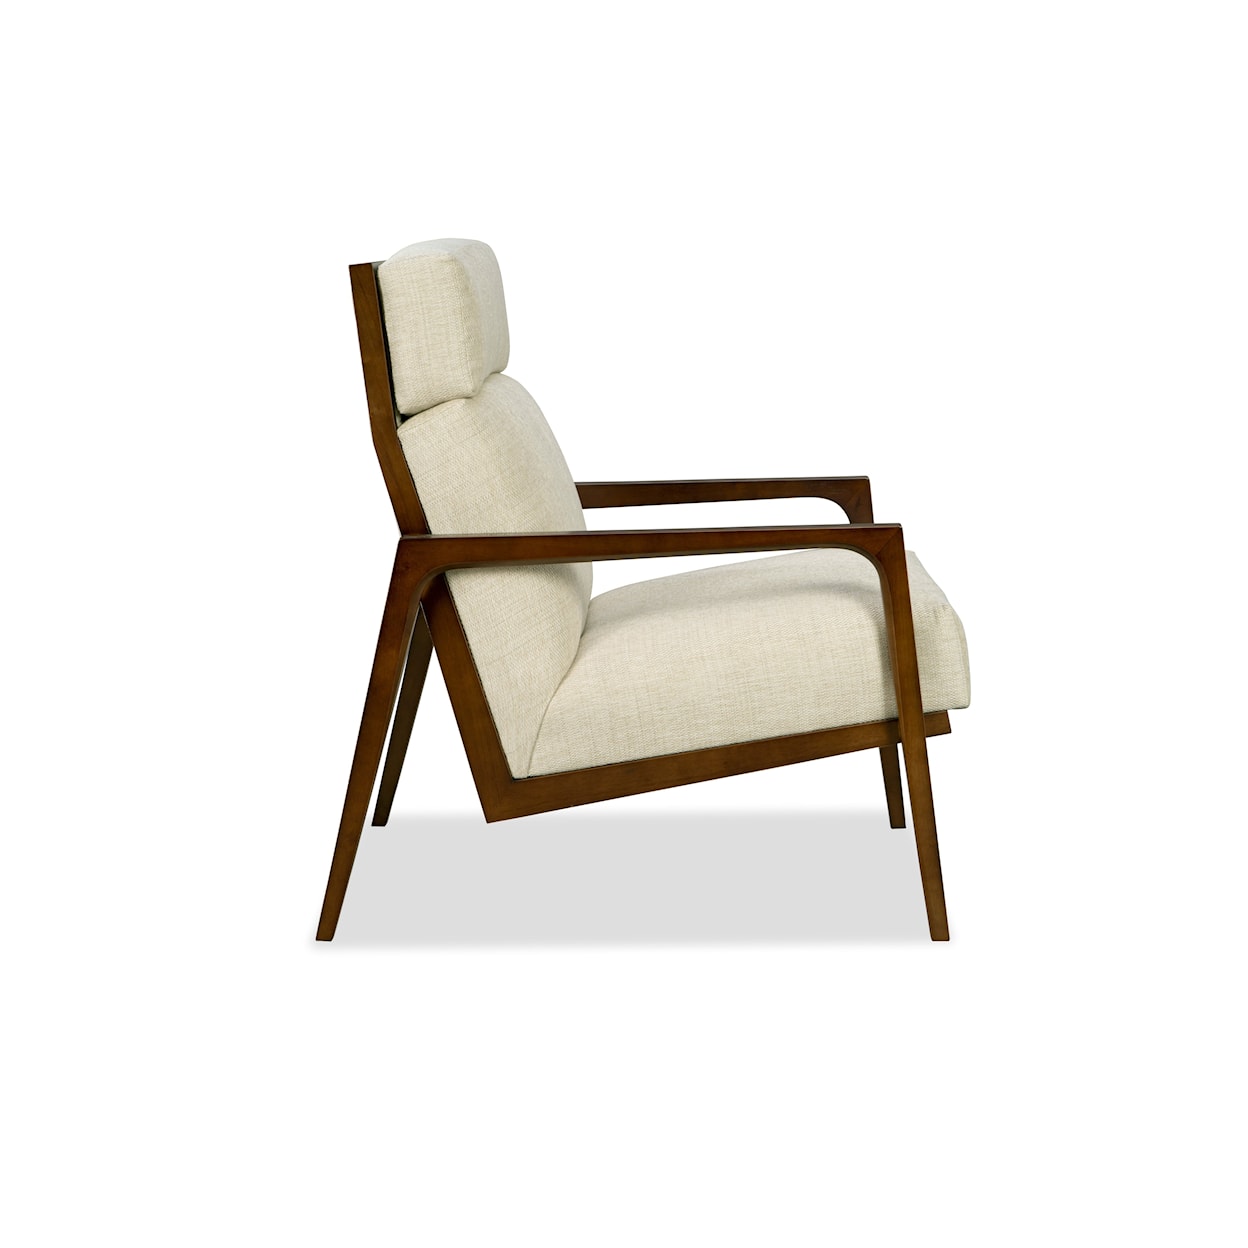 Hickory Craft 039110 Accent Chair